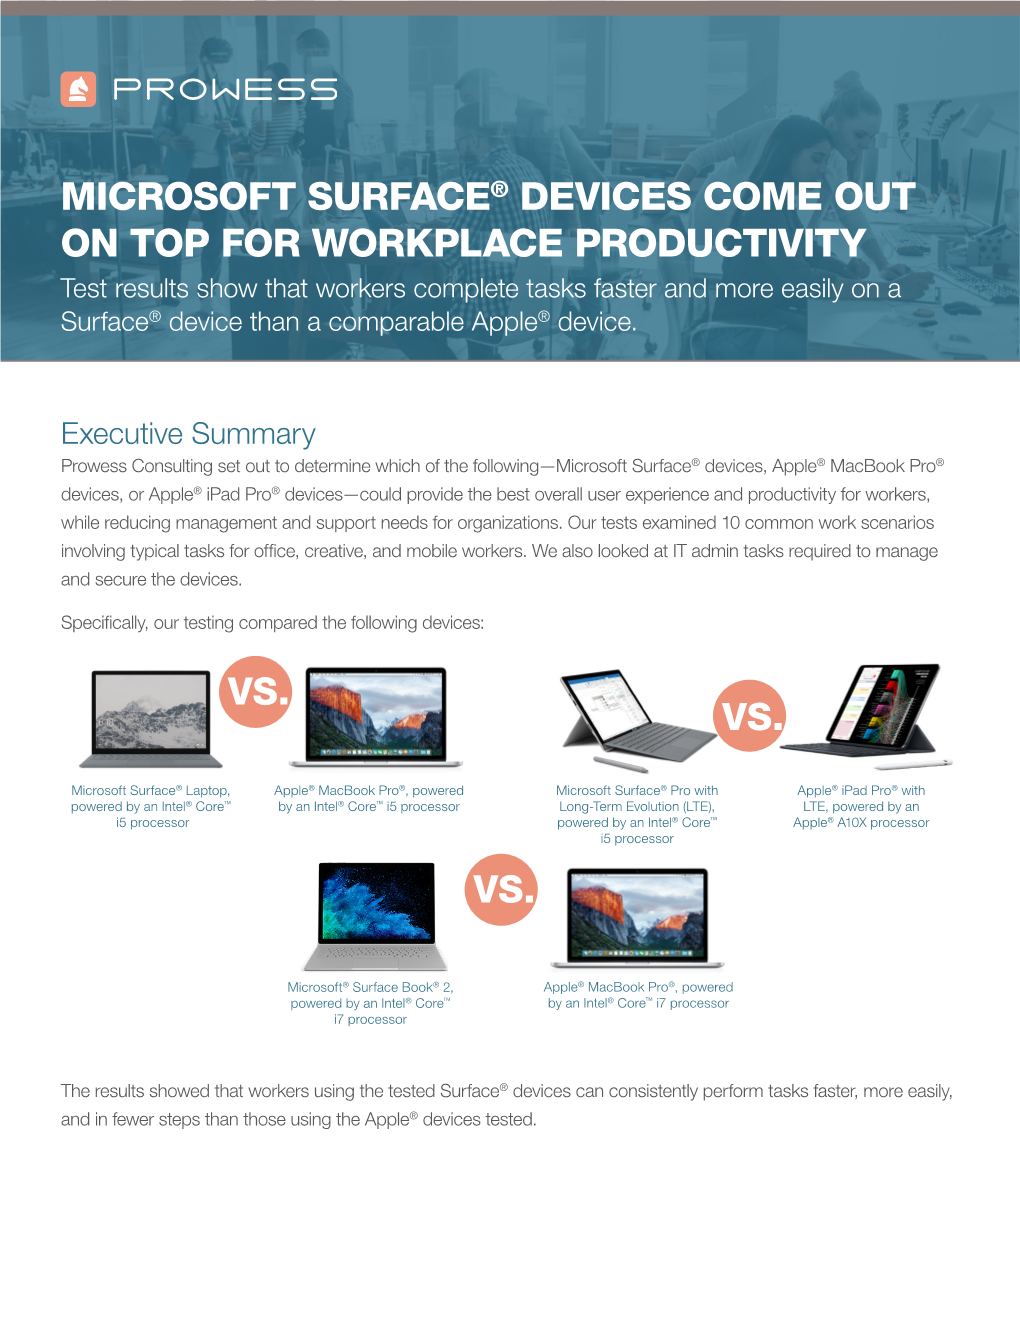 Microsoft Surface Devices Come out on Top for Workplace Productivity